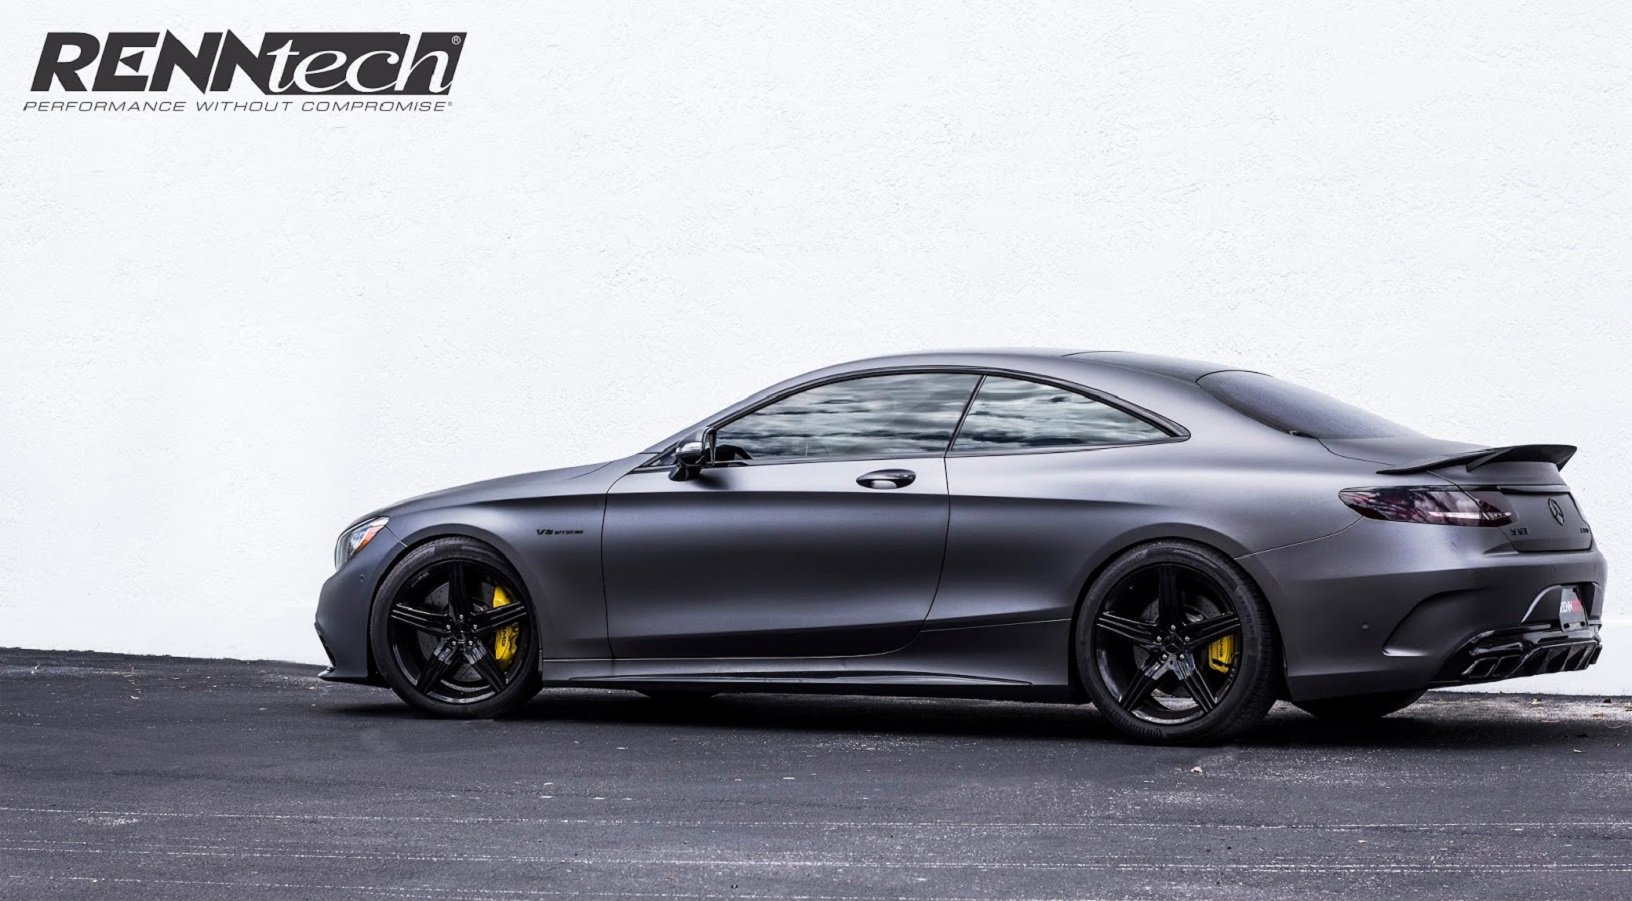 mercedes, Amg, S63, Coupe, Cars, Modified, Renntech Wallpaper